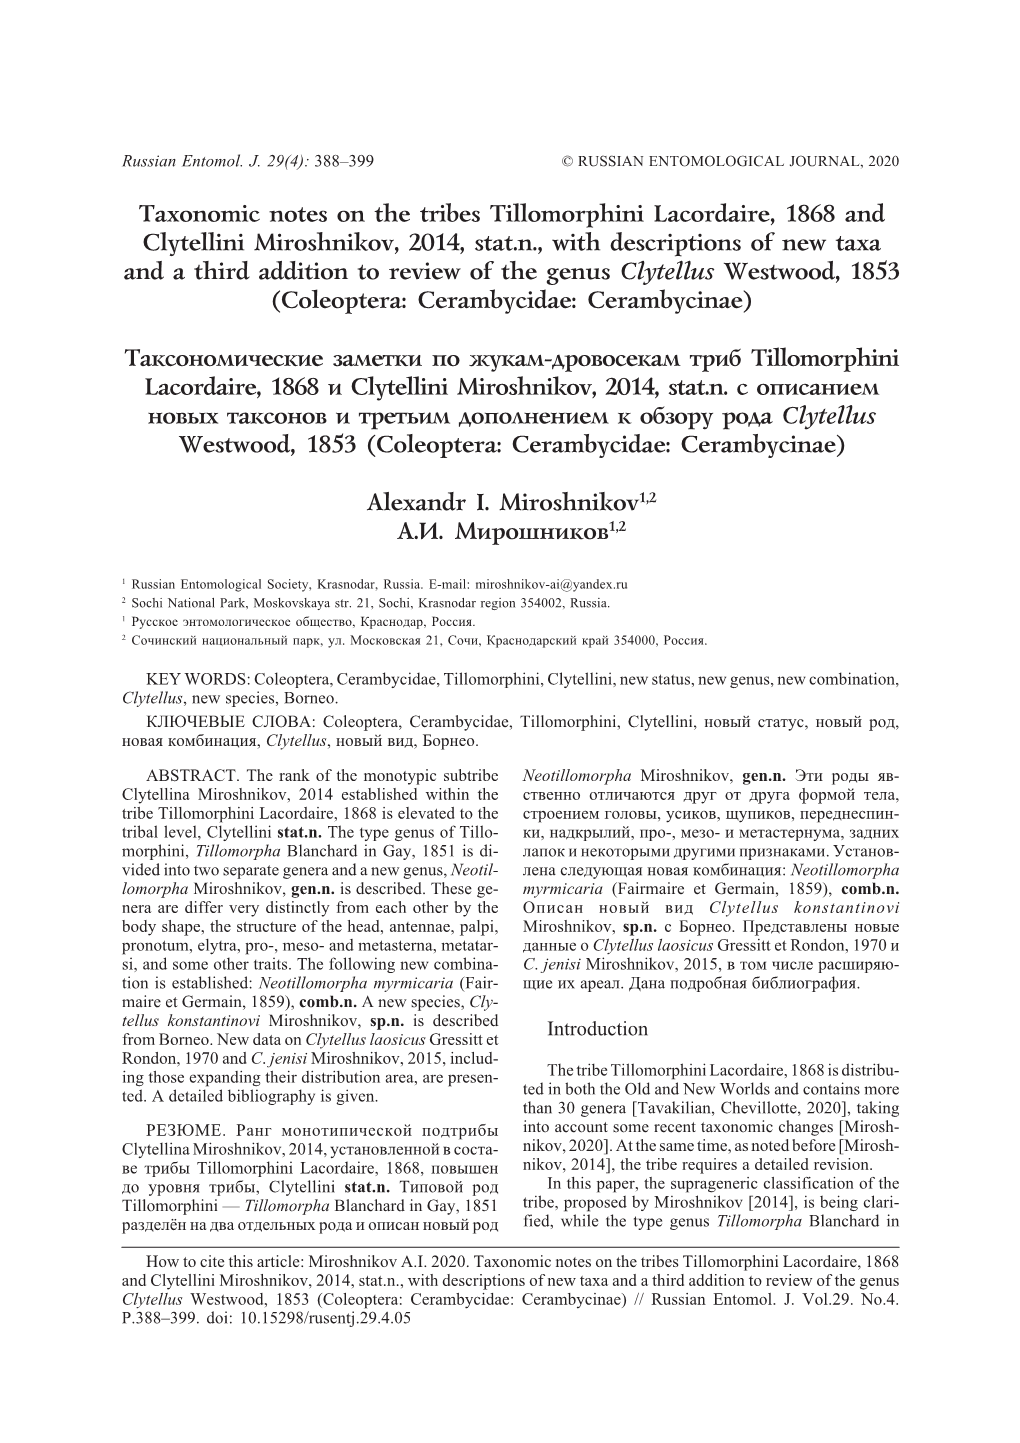 Taxonomic Notes on the Tribes Tillomorphini Lacordaire, 1868 And